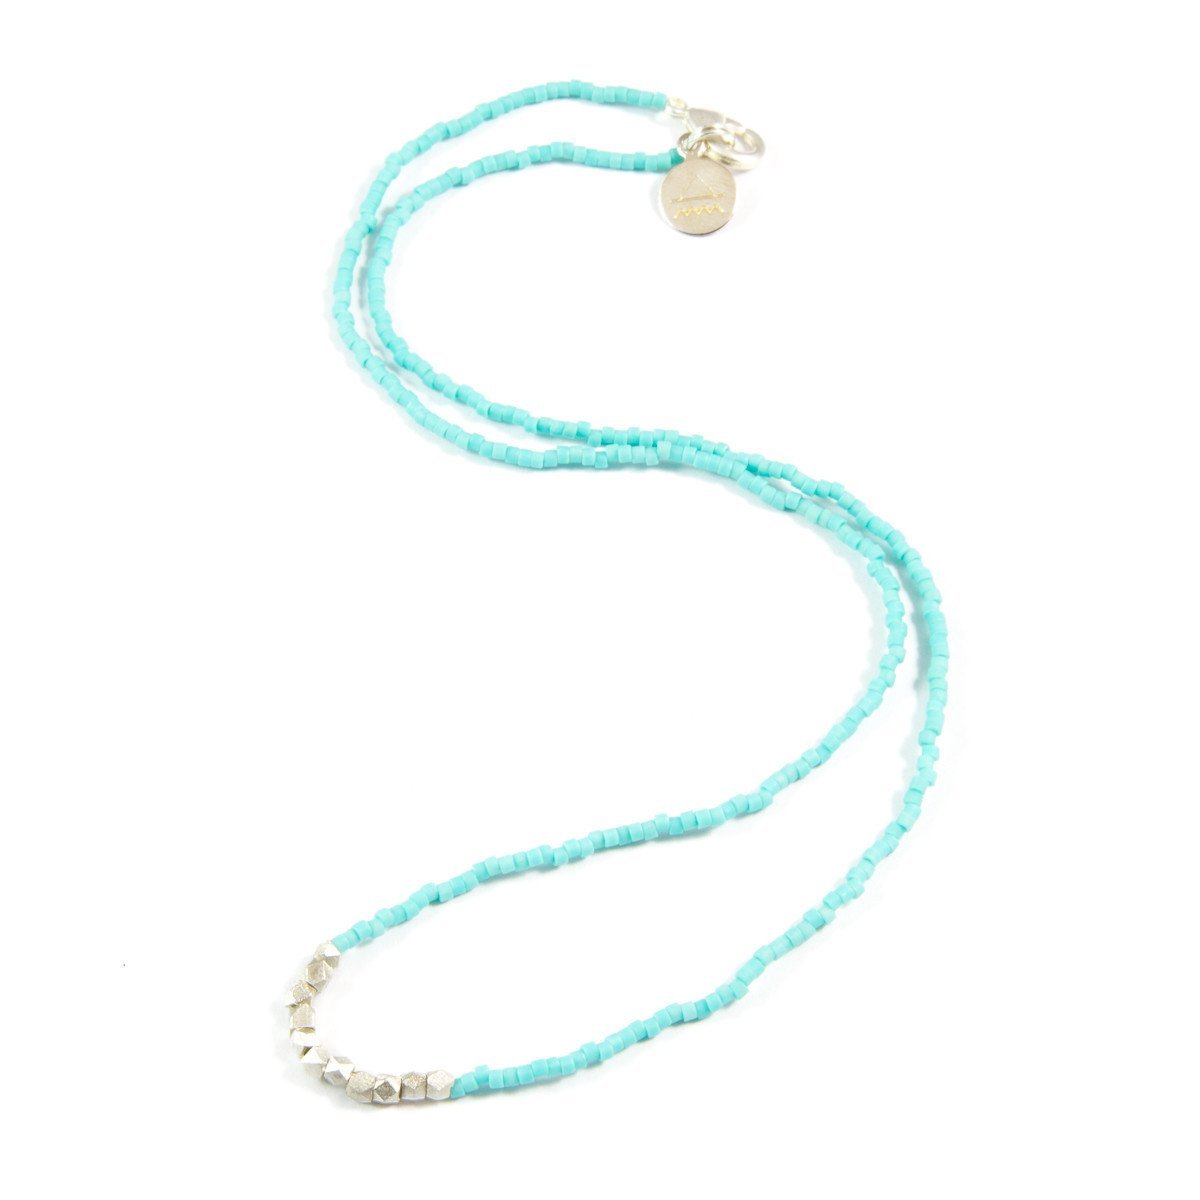 Teal Day to Night Necklace in Silver